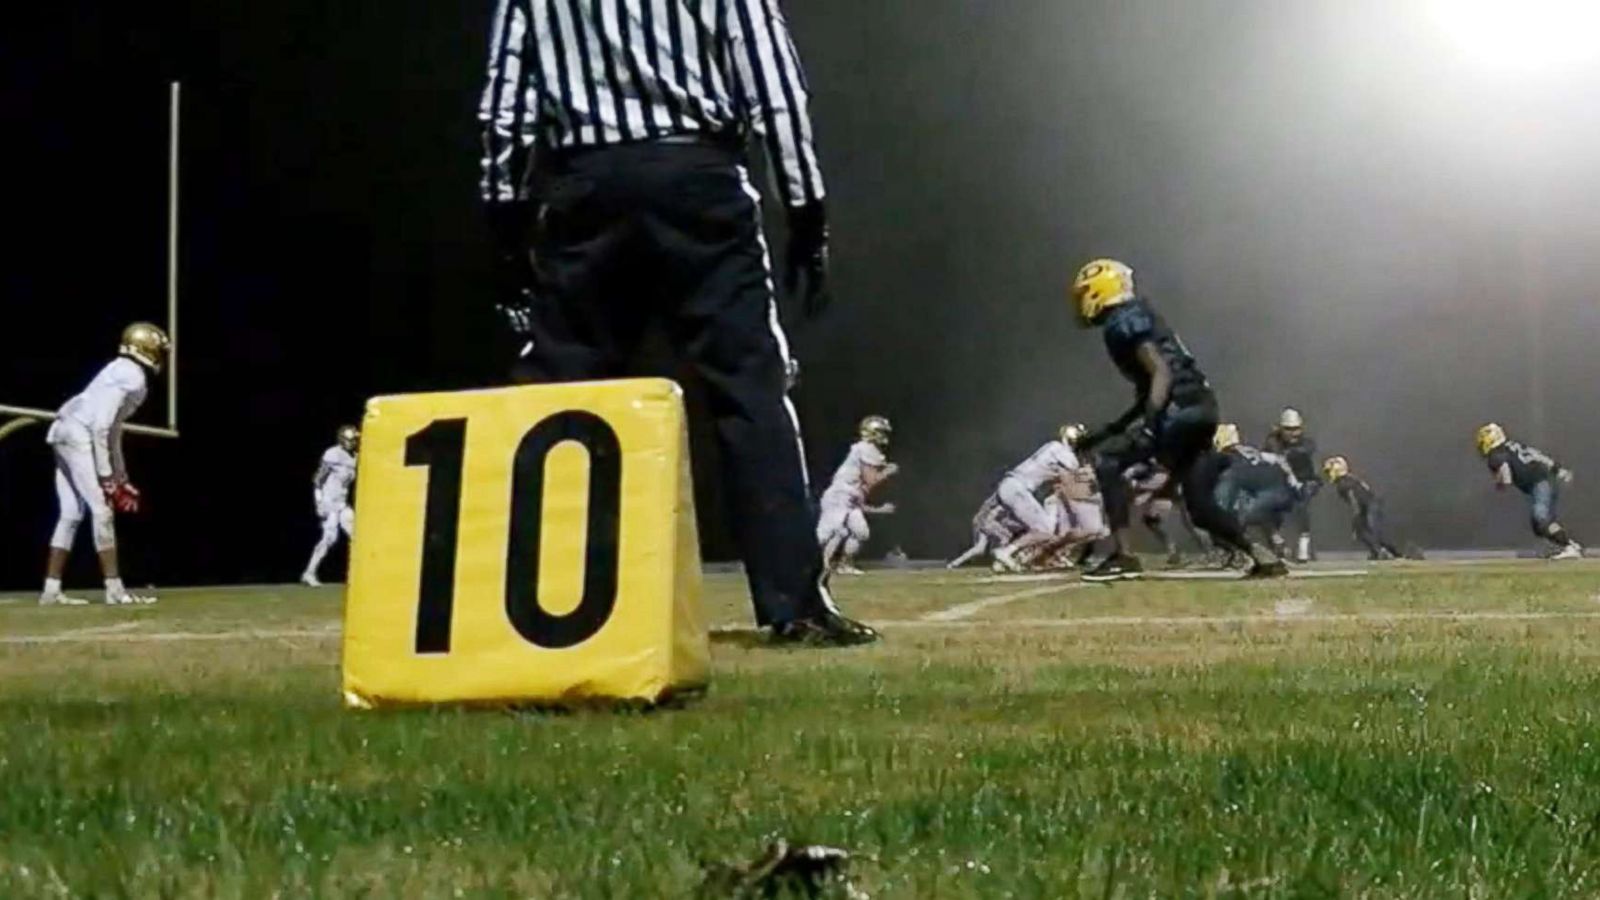 High School Football Players Indicted For Rape In Alleged Broom Attack Officials